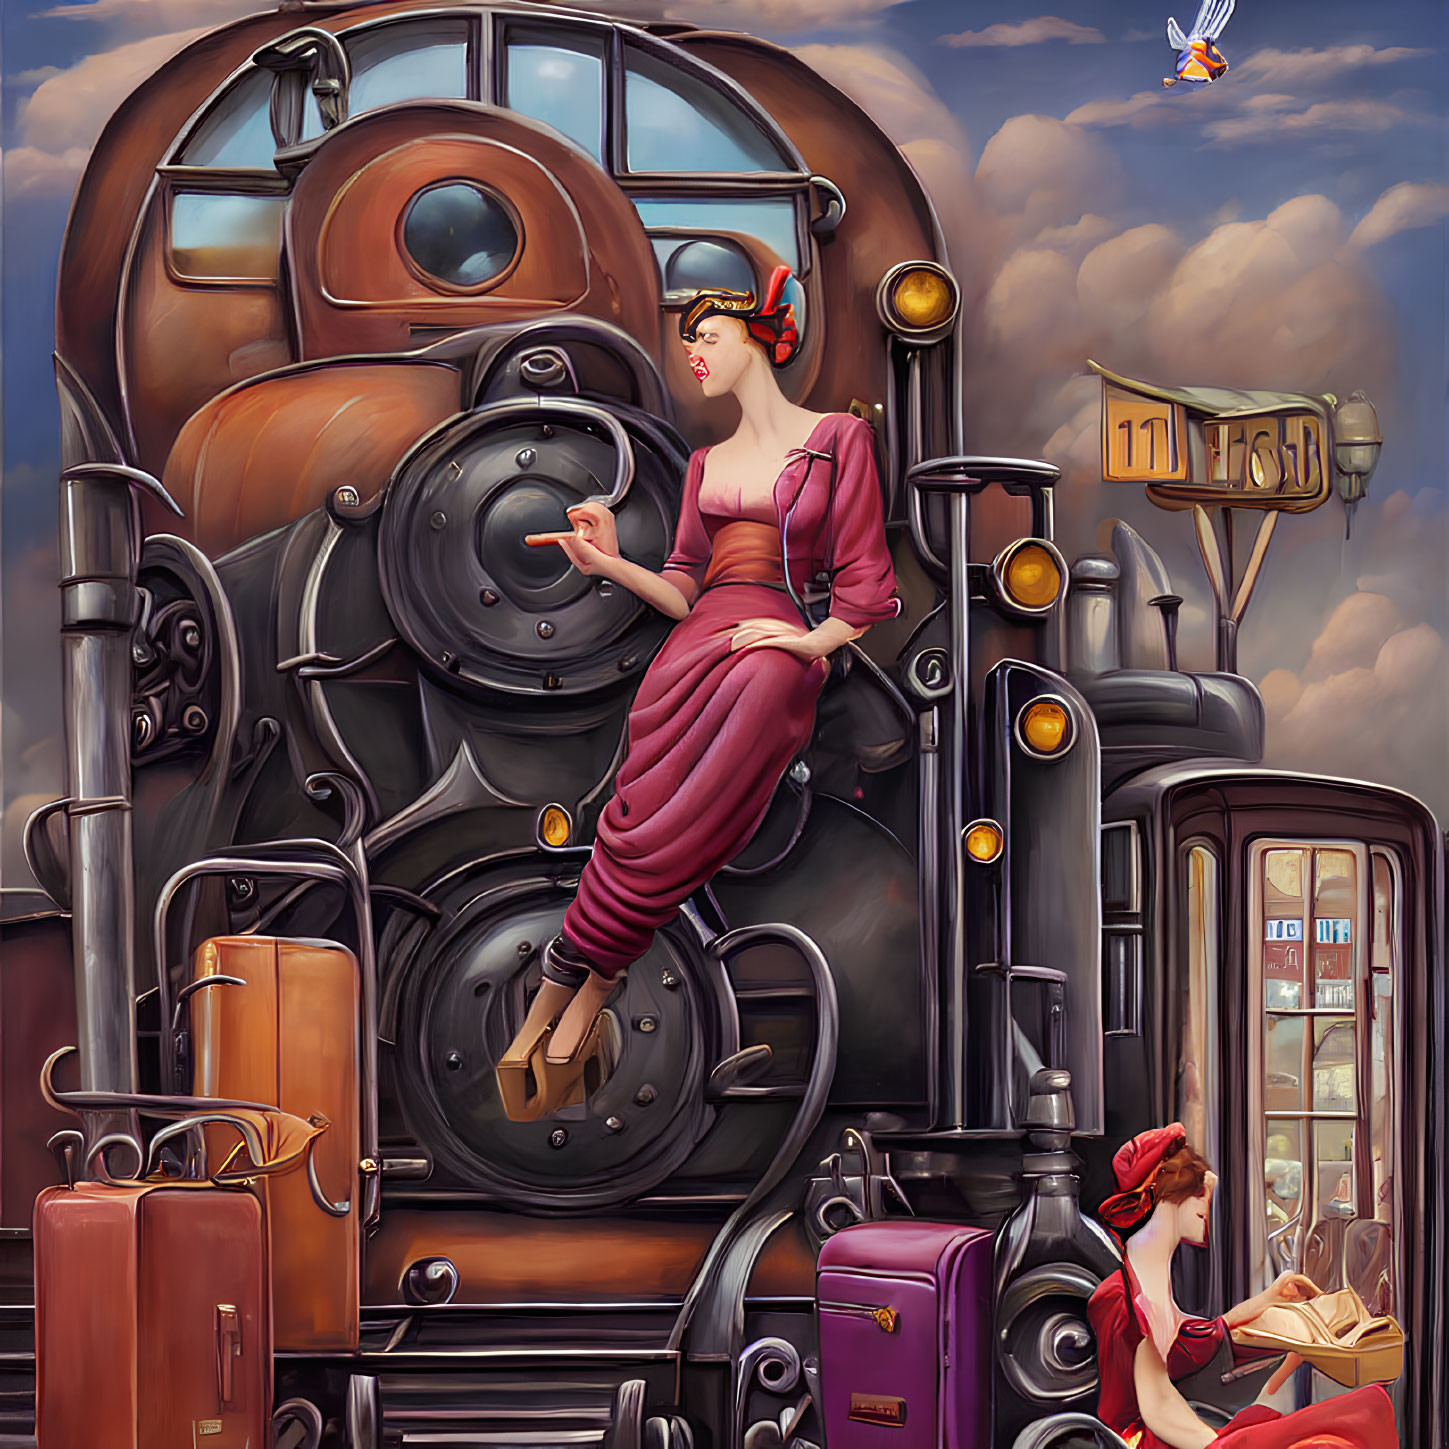 Stylized illustration of two women in 1950s fashion with classic train and vintage plane